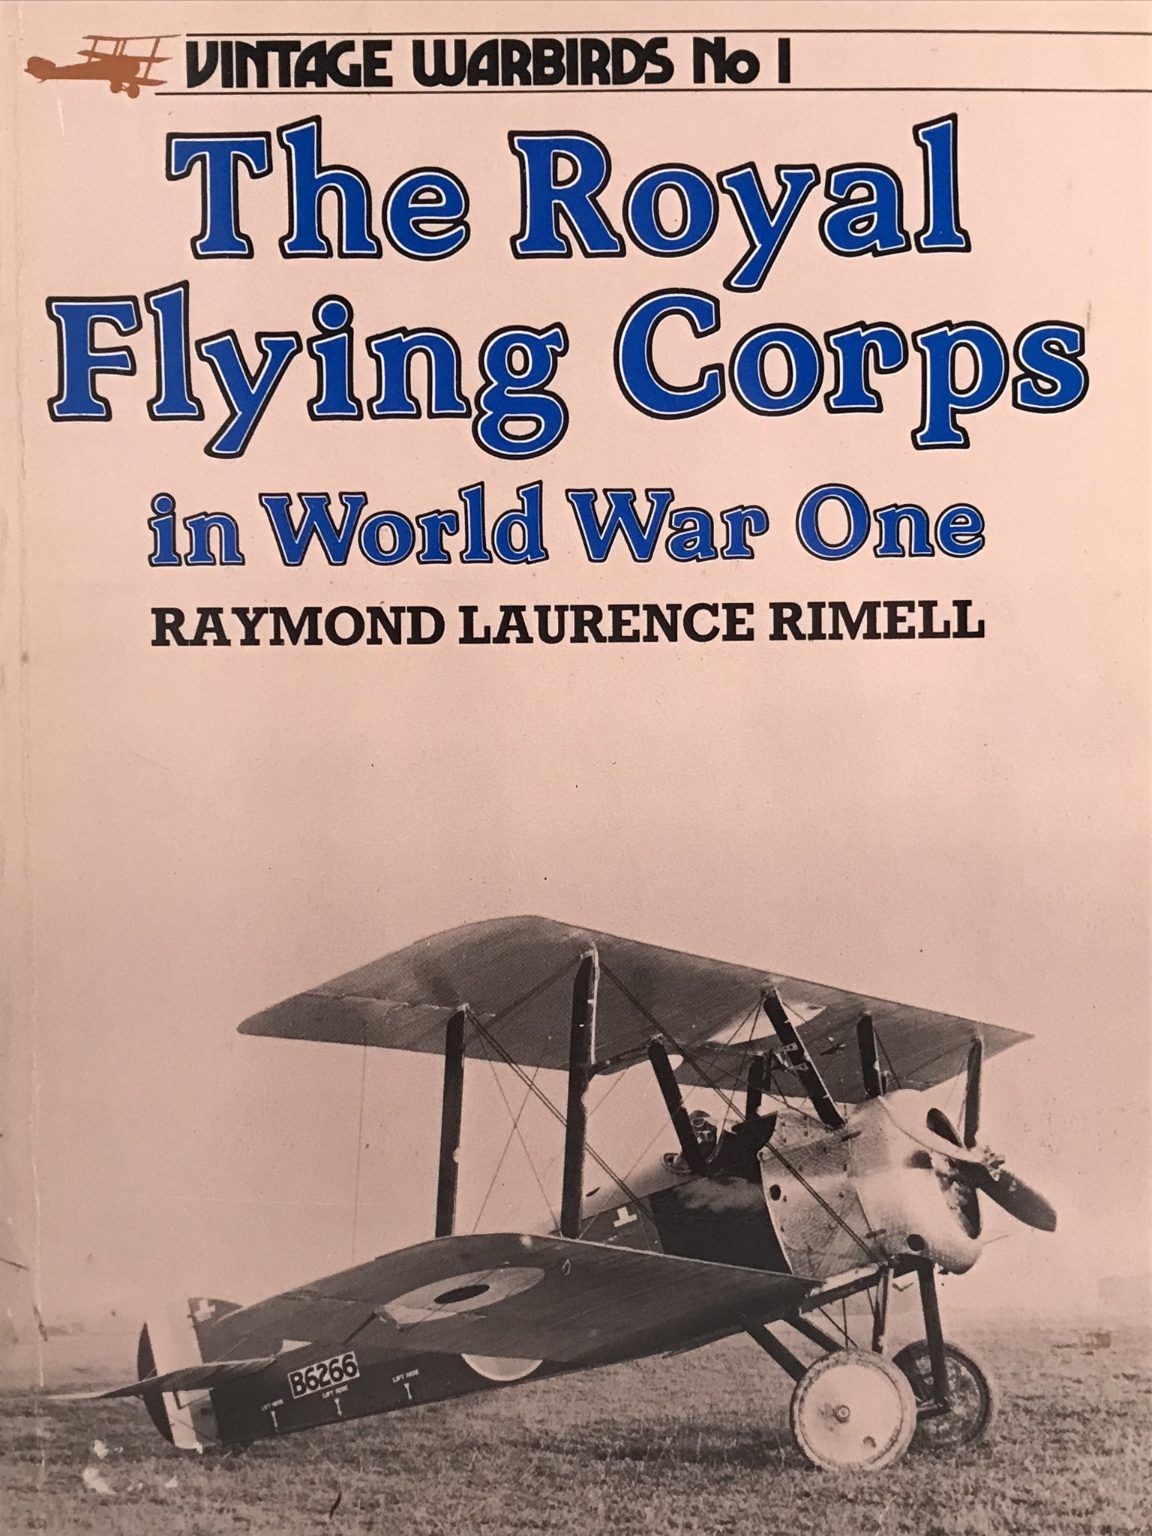 THE ROYAL FLYING CORPS in World War One